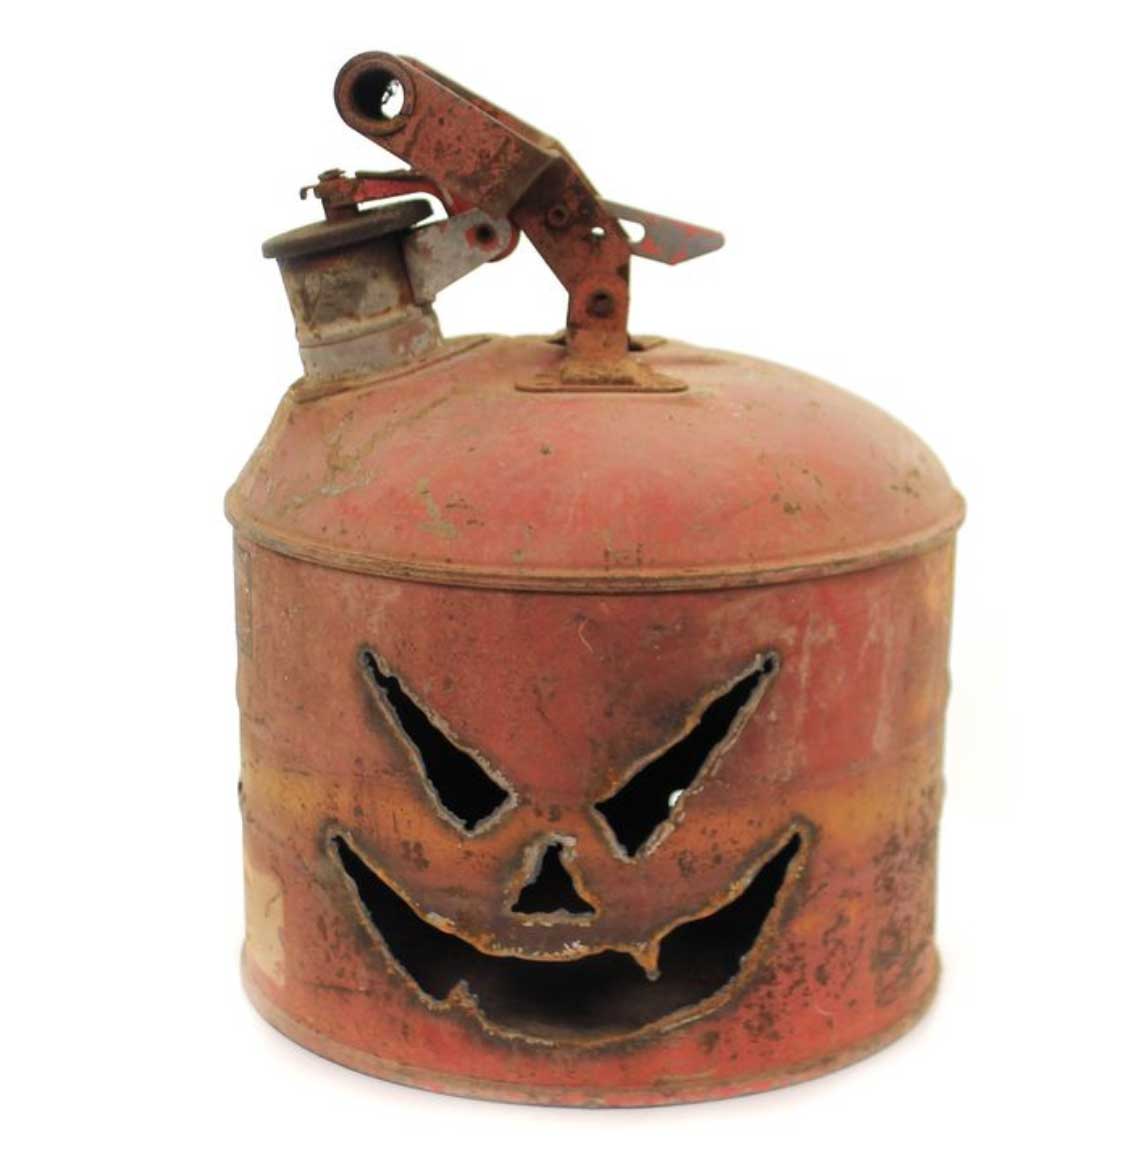 Repurposing a gas can as a jack-o-lantern is a popular new trend. Find a how-to videeo on YouTube. (Image courtesy of Pinterest) 